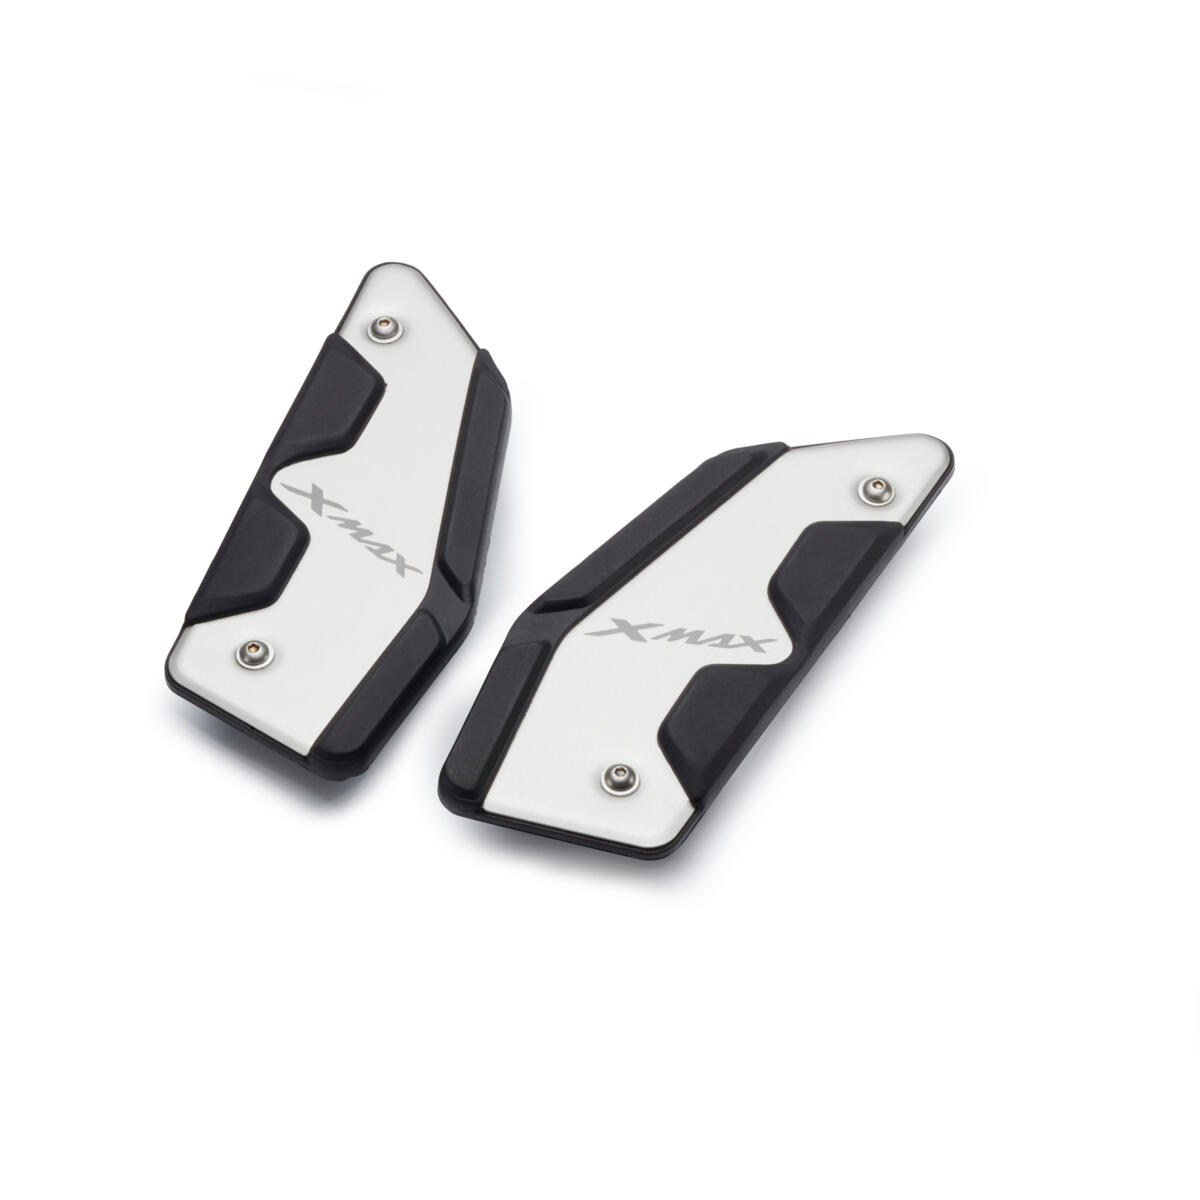 Quality foot panels for an added stylish look. Anodized Aluminium with rubber pads.